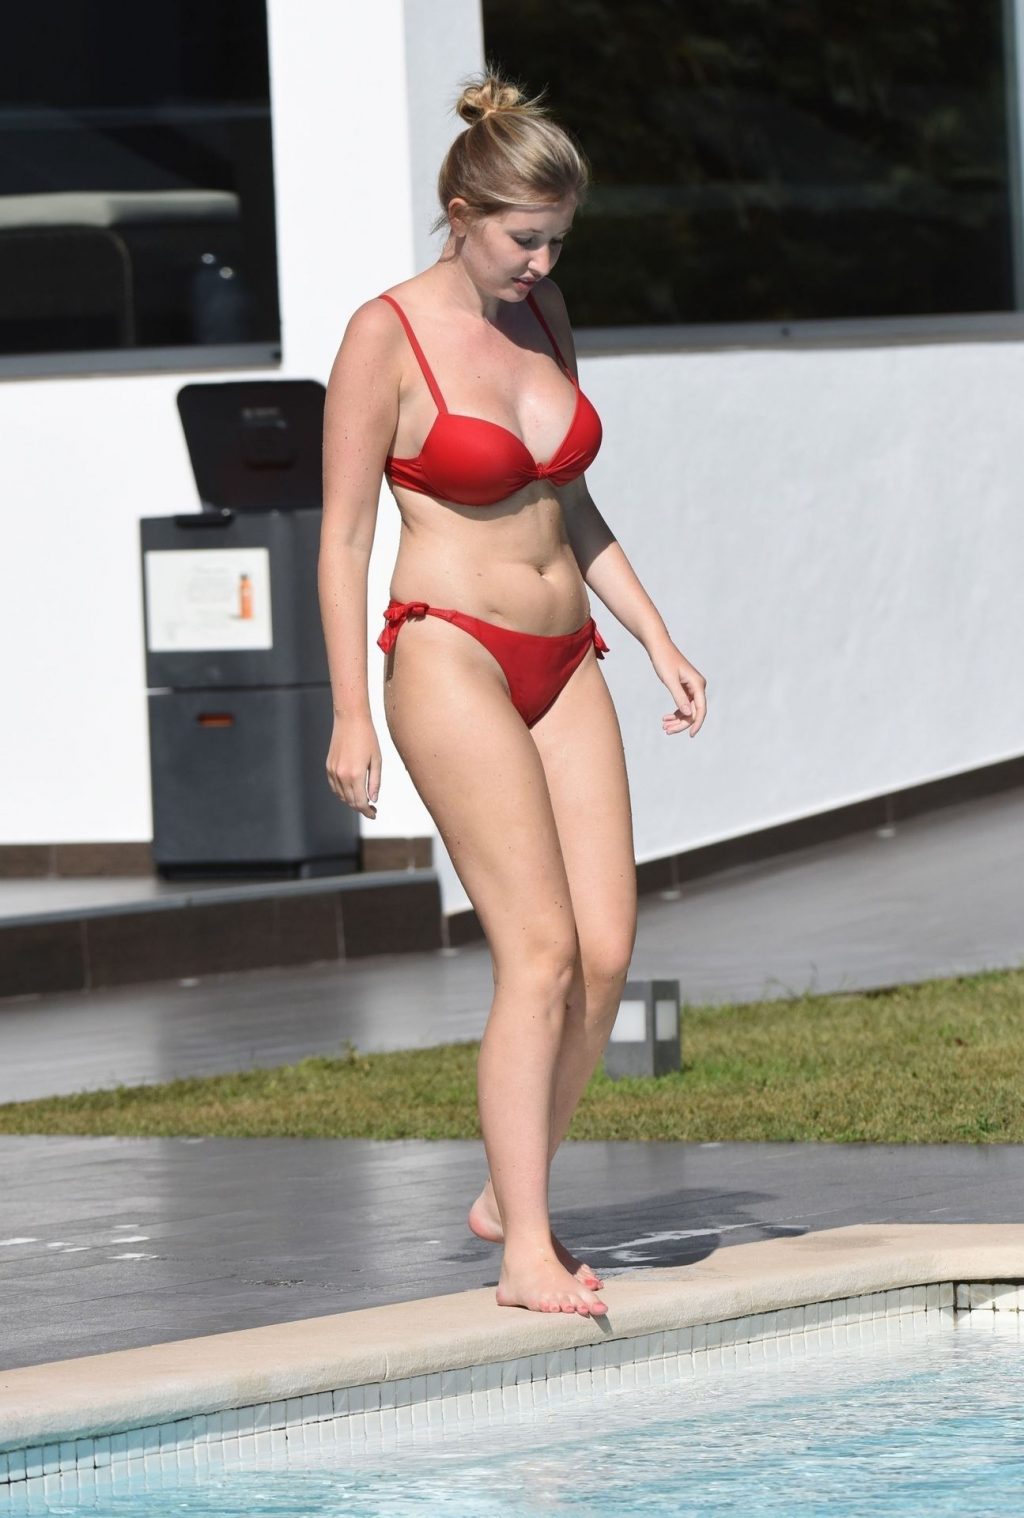 Amy Hart Stuns in a Fiery Red Bikini Soaking in the Sweltering Heat on Holiday in Portugal (31 Photos)